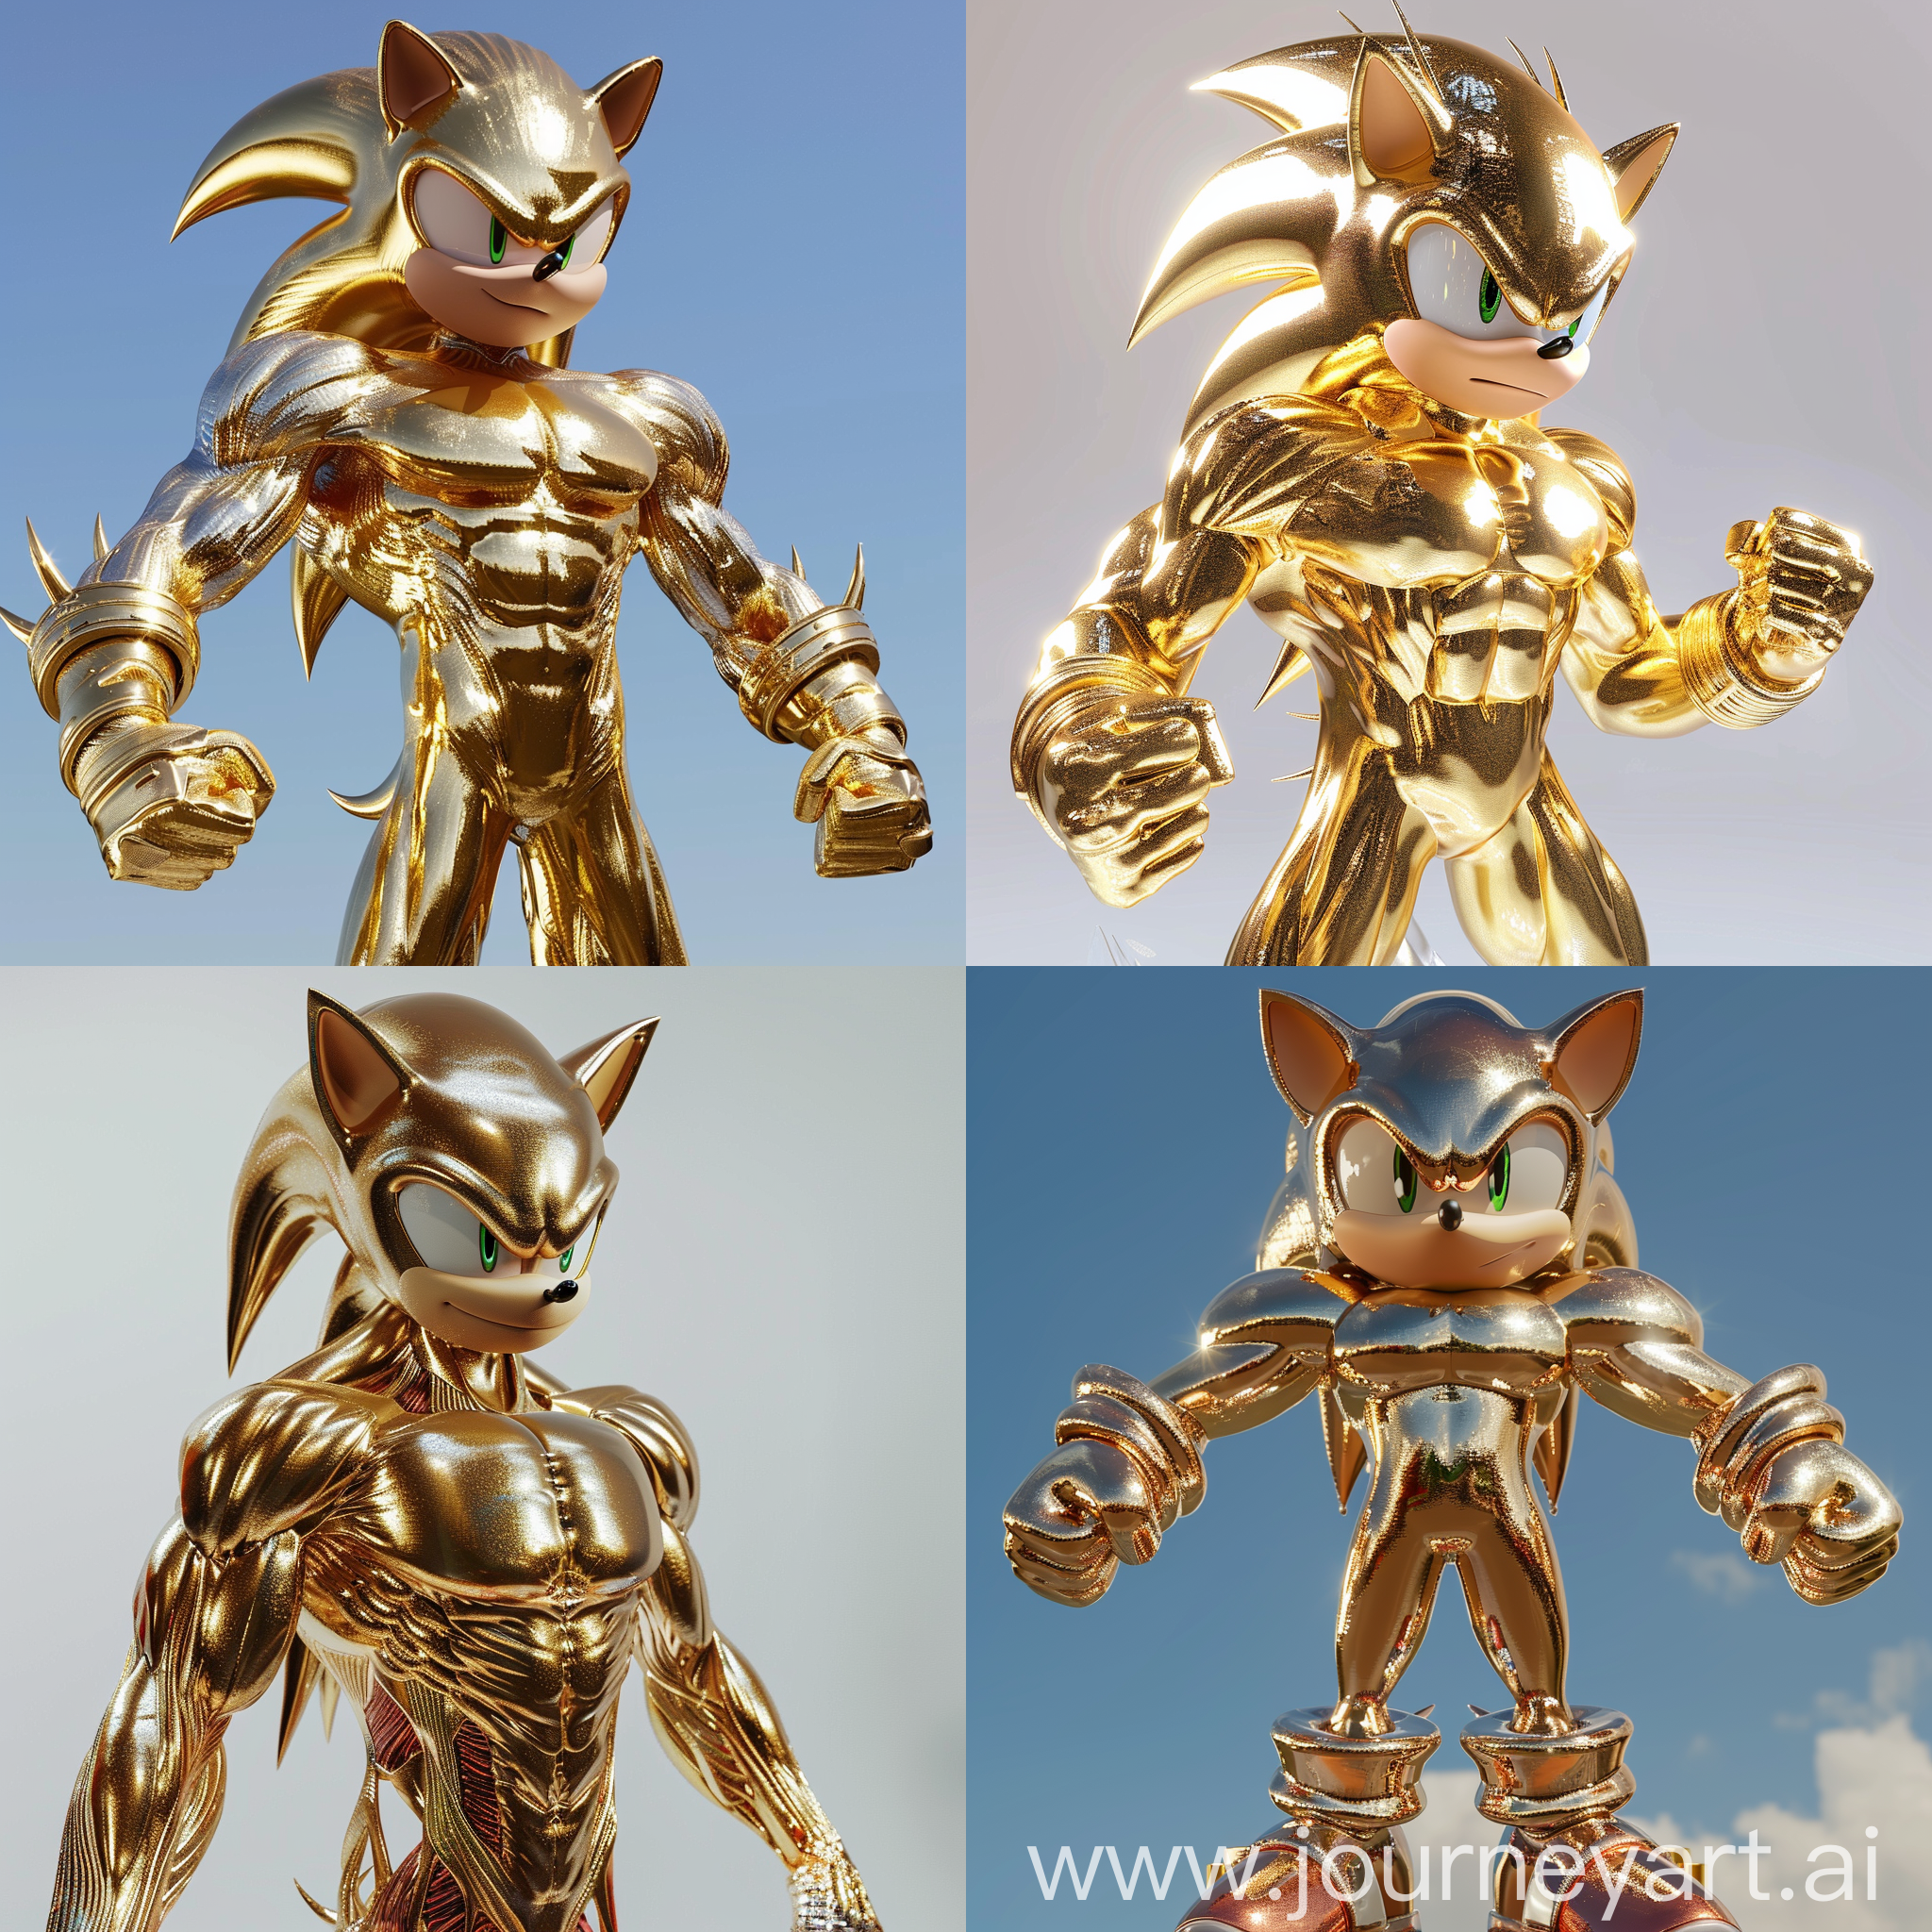 sonic with big muscles, epic pose and his body is entirely gold, on clear background, all body view